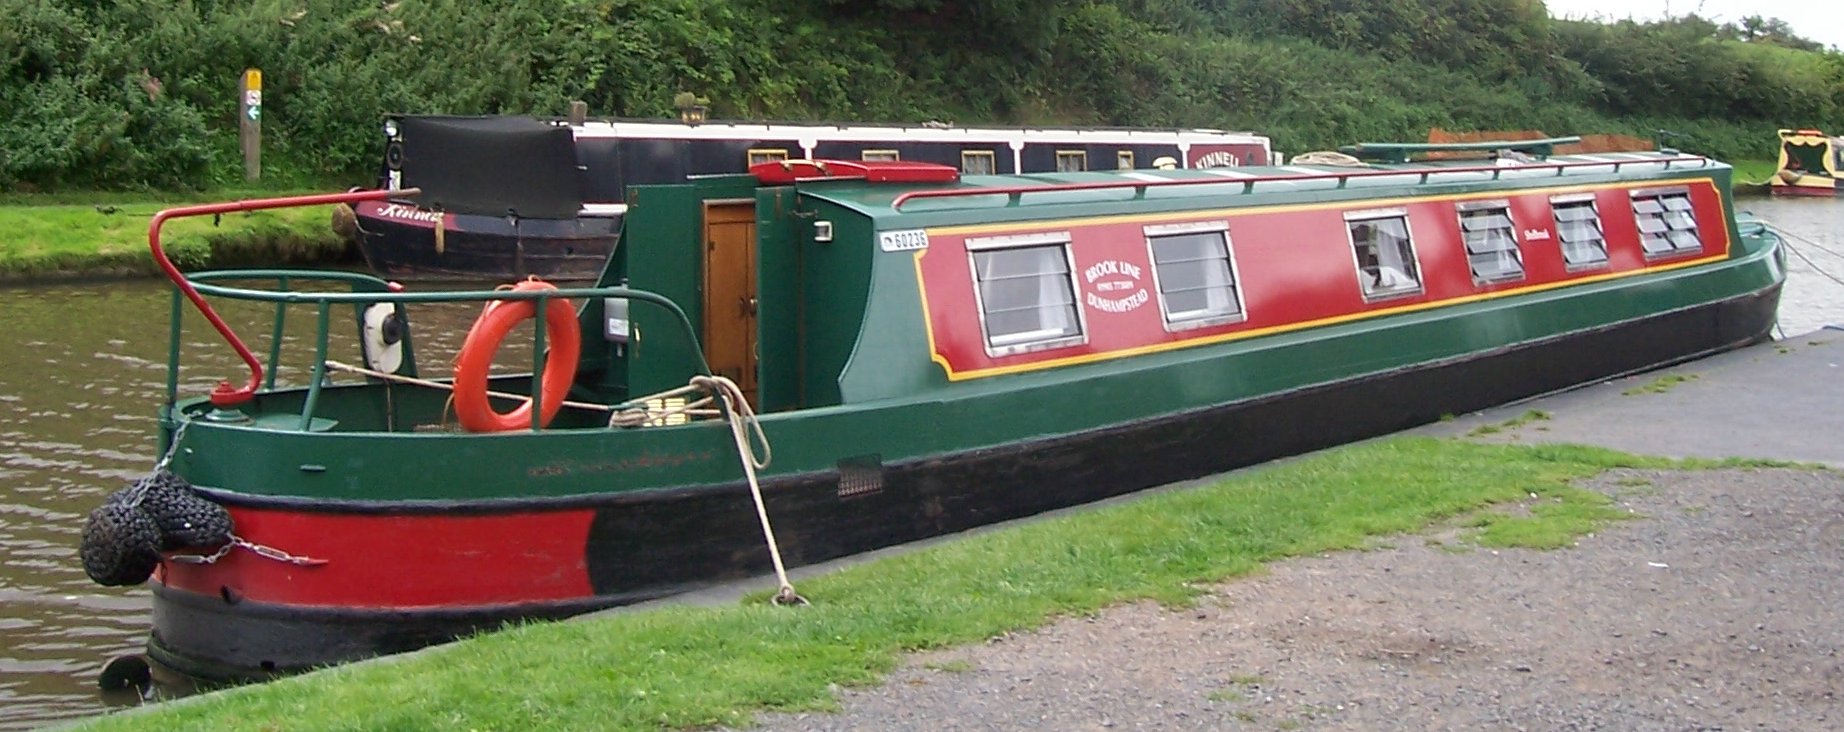 canal boat plans how to building amazing diy boat - boat